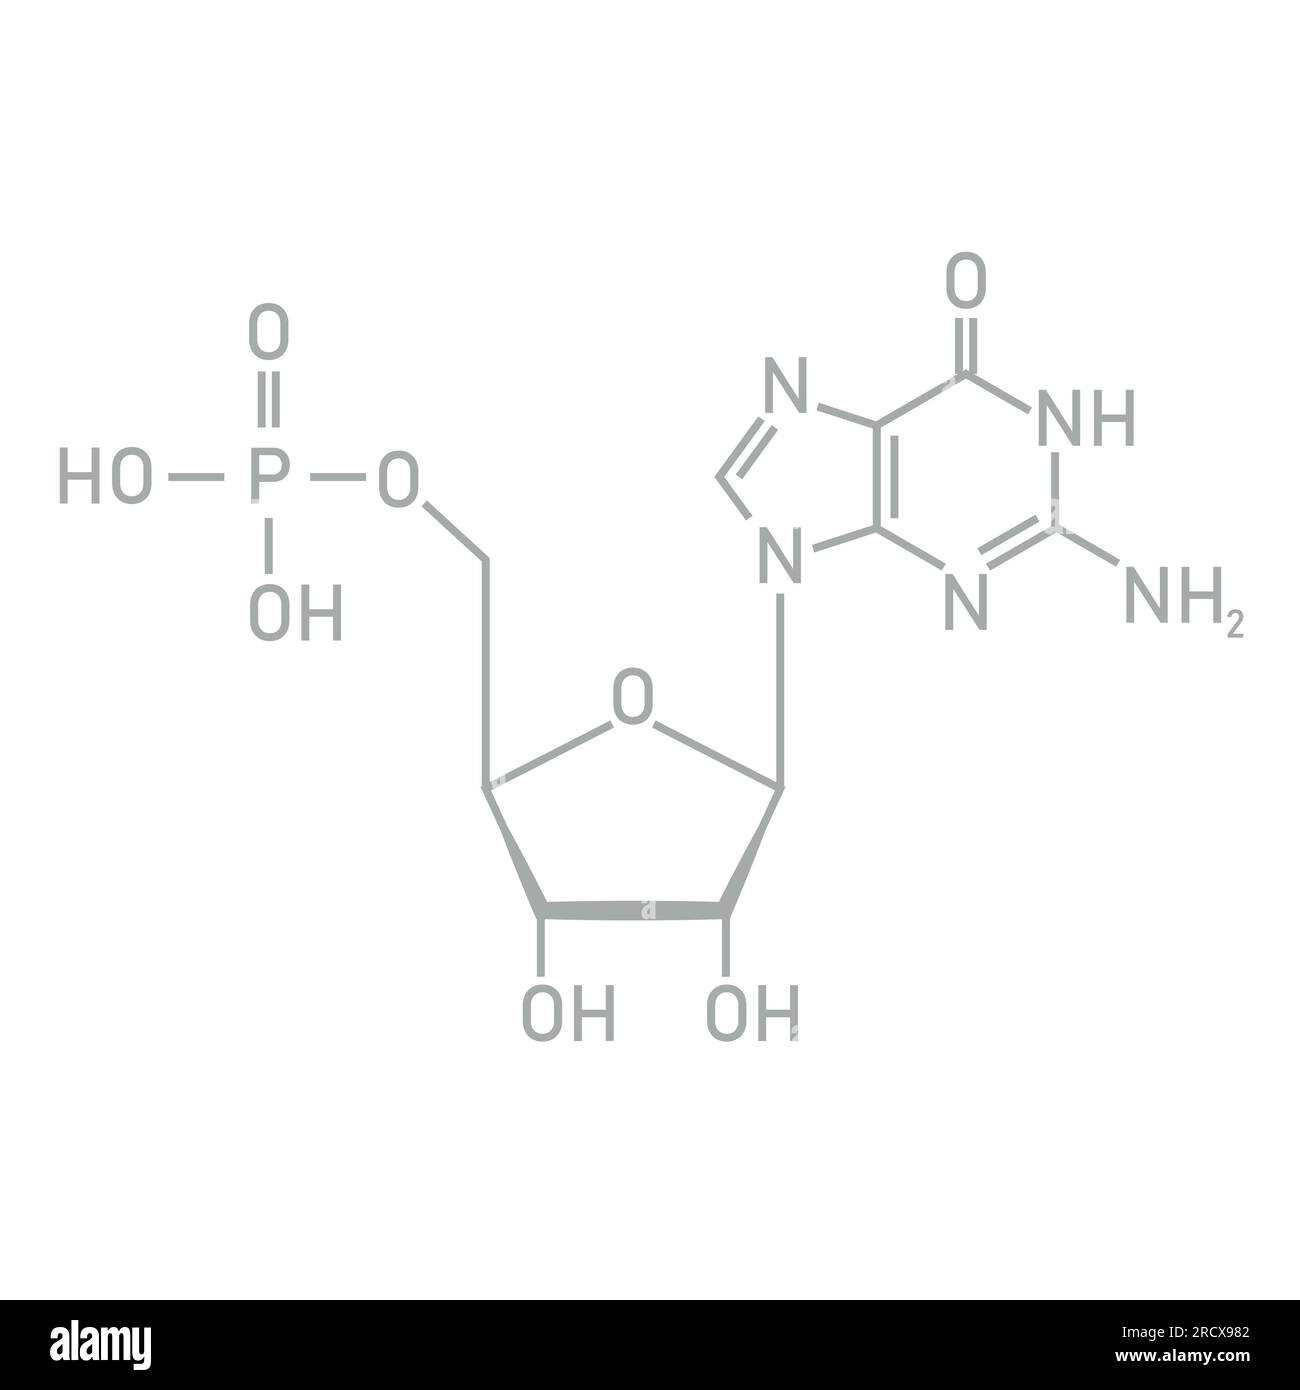 Chemical structure of DNA nucleotide. Three parts of a nucleotide. Phosphate group, pentose sugar and nitrogenous base. Nucleic acids Stock Vector